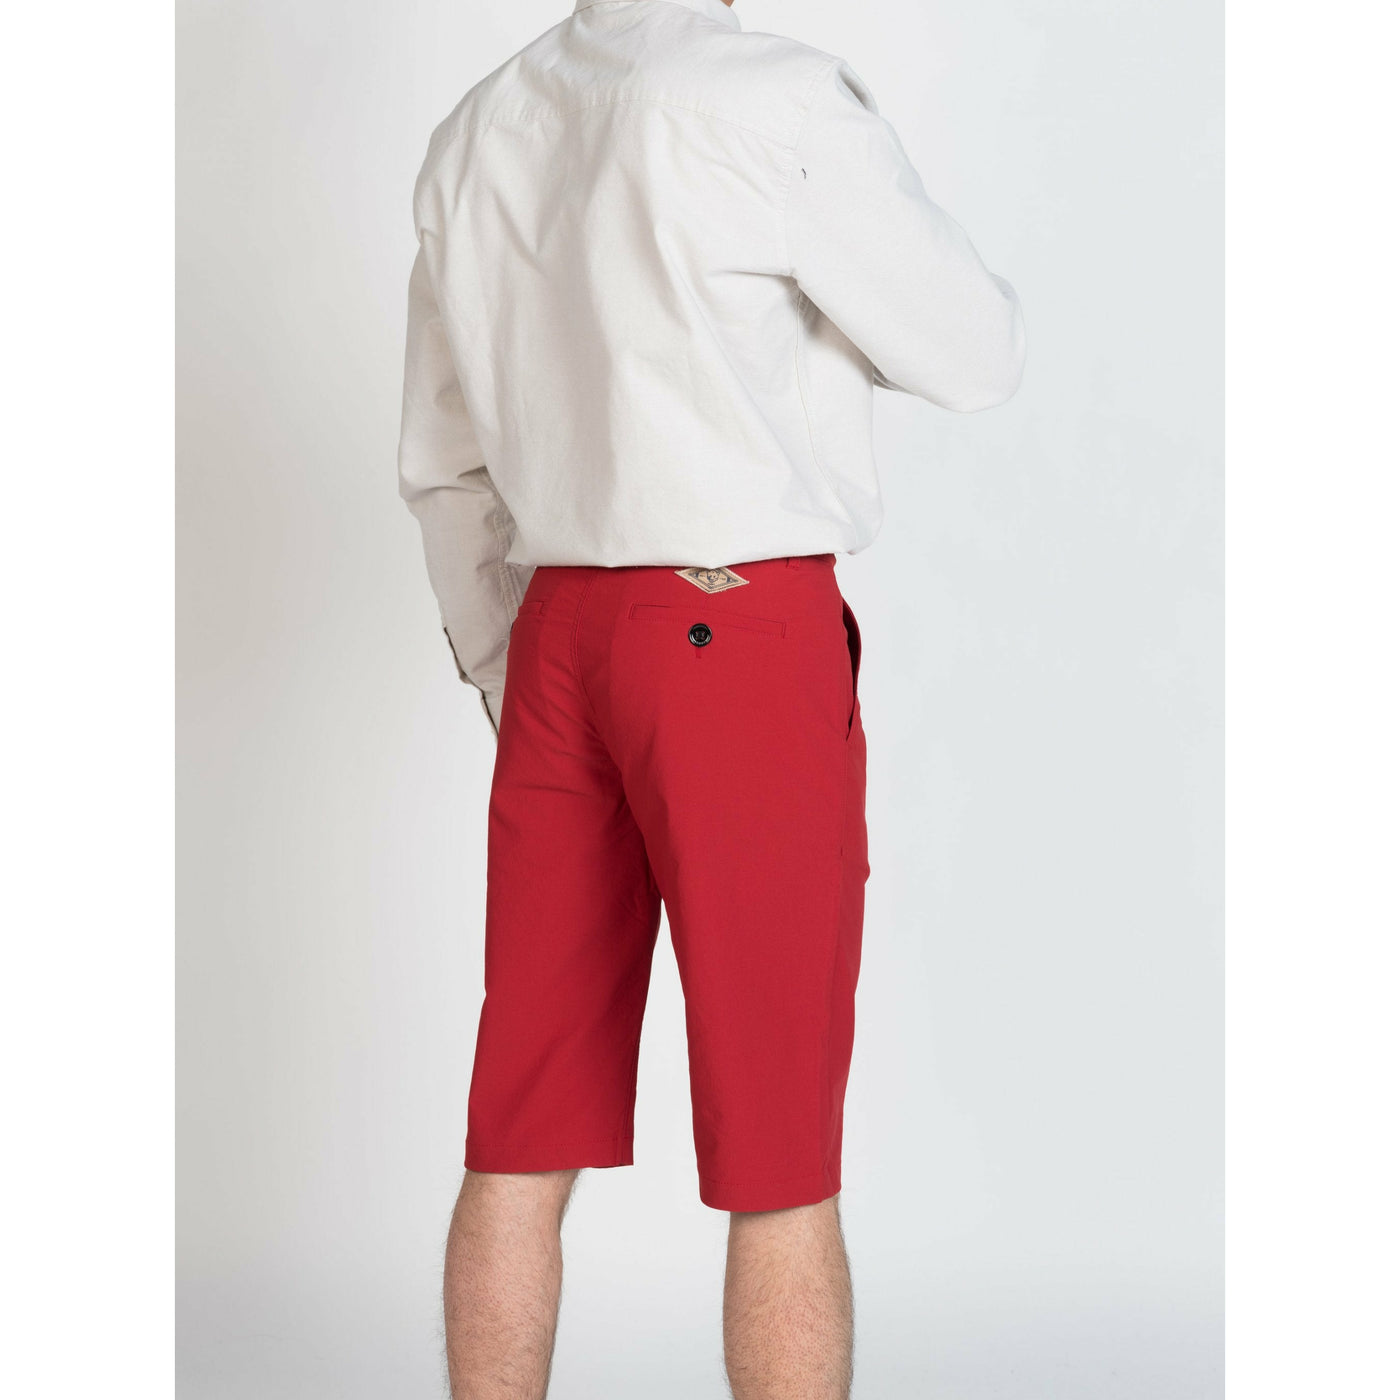 BREDDY'S - shorts L.A. Basic #farbe_red